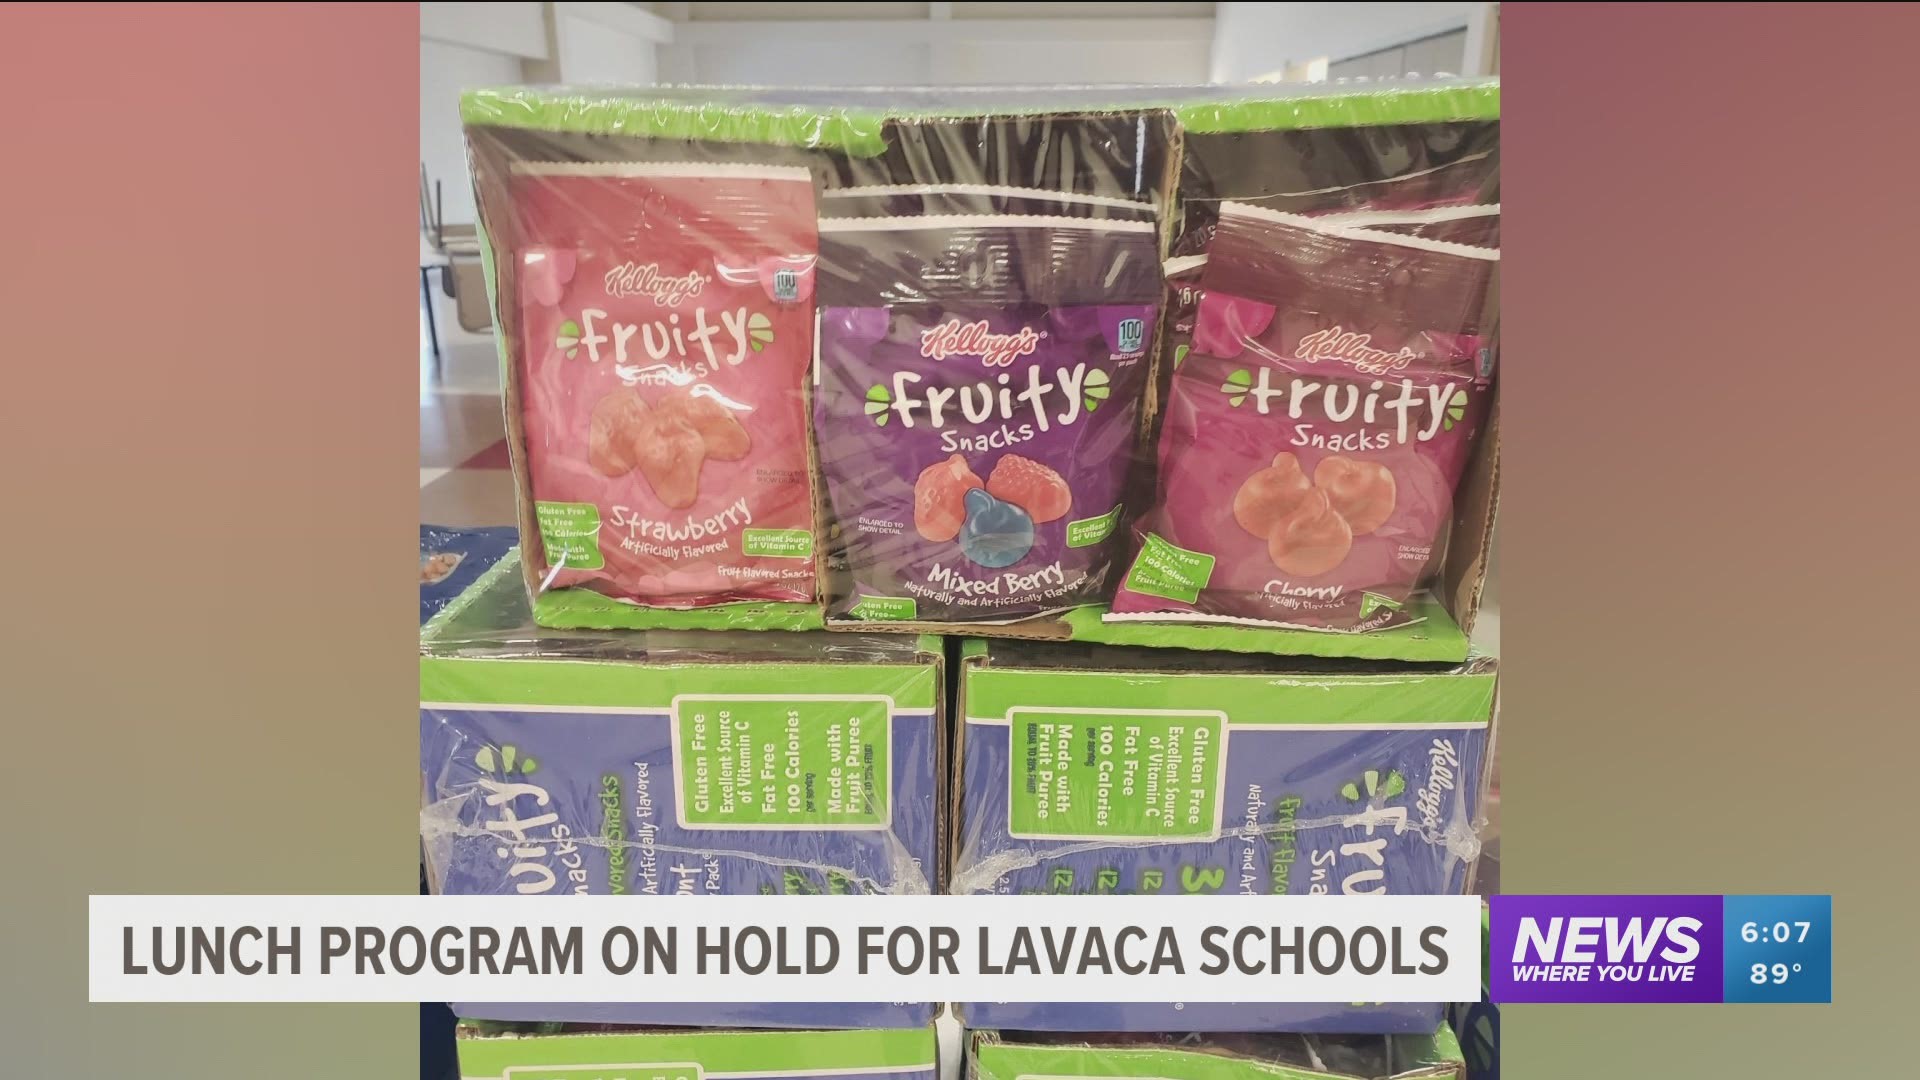 Lunch program on hold for Lavaca schools